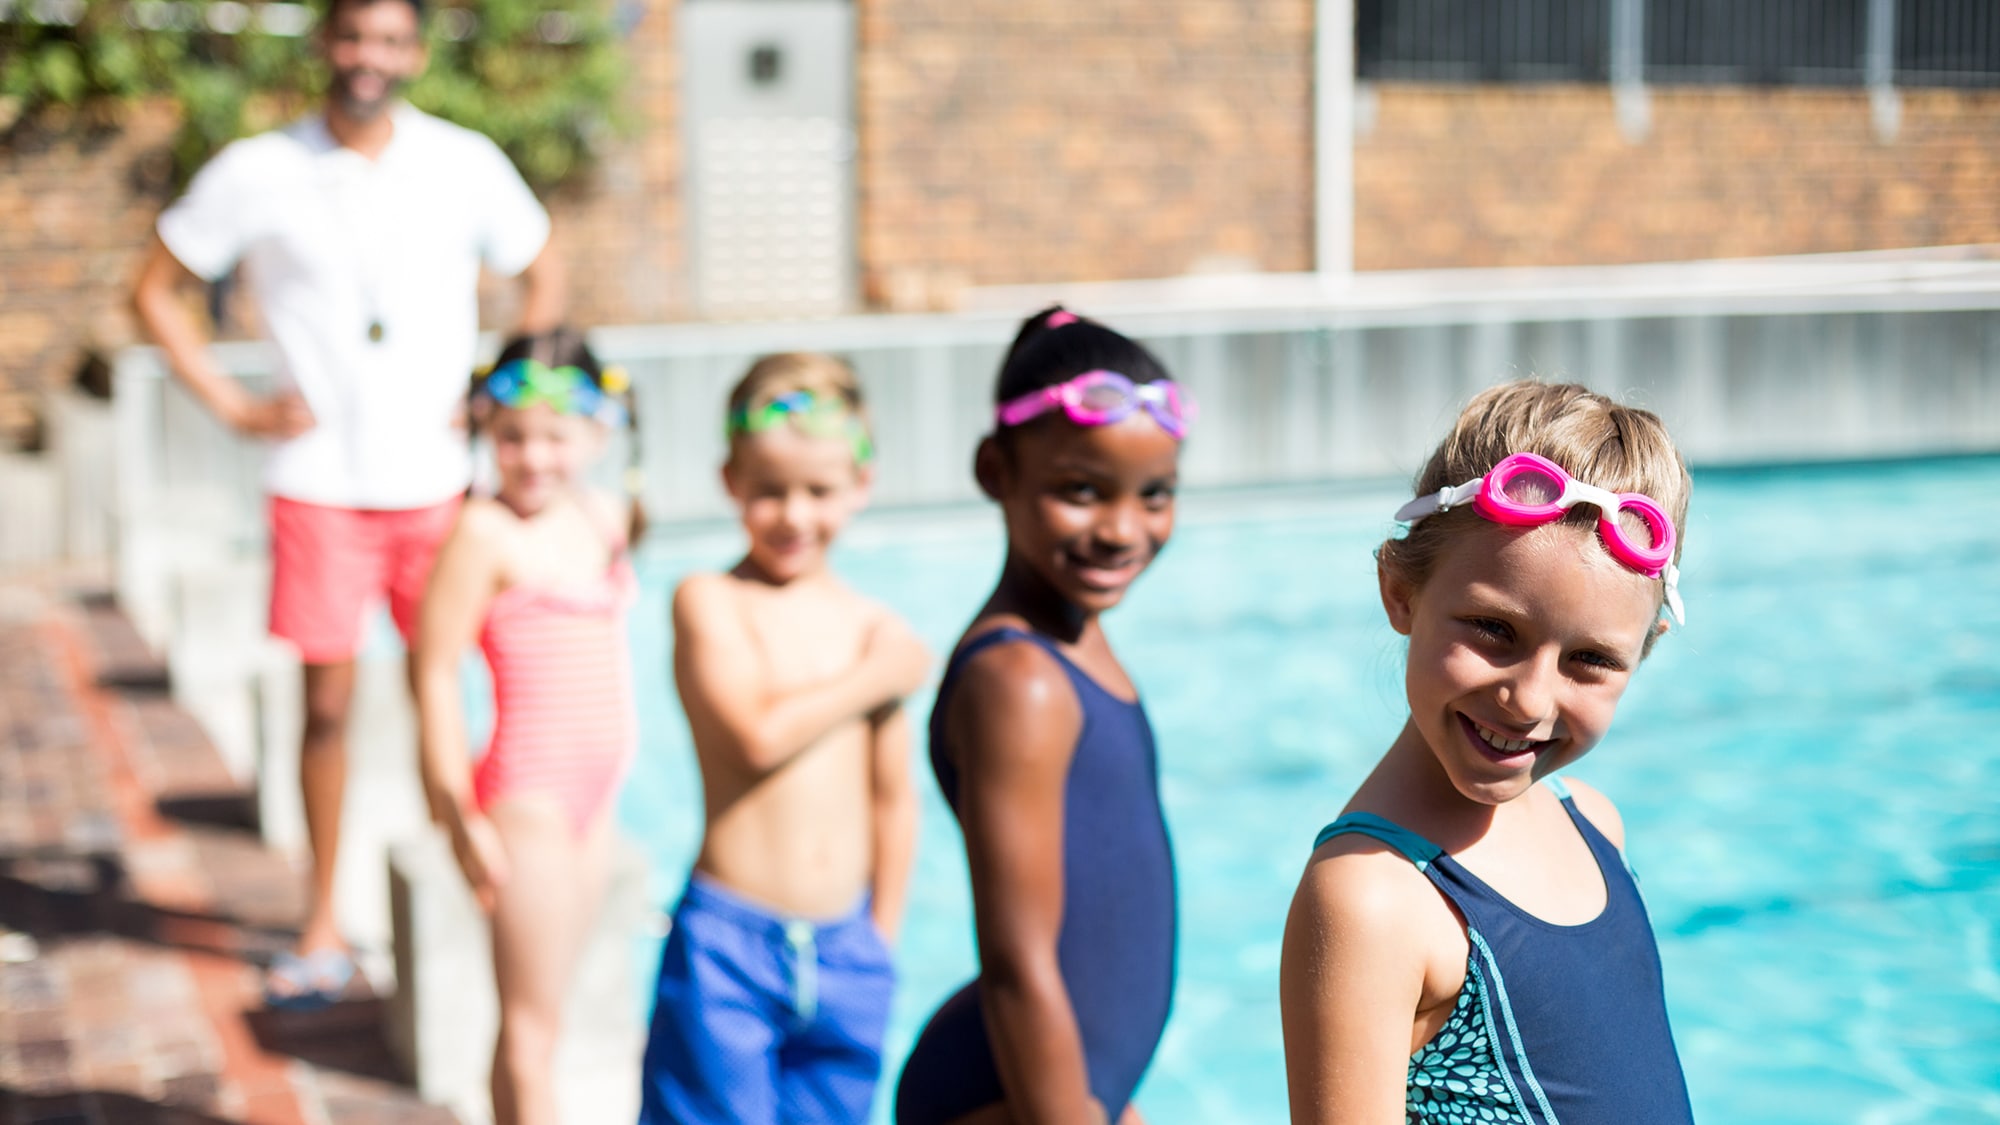 Children at an outdoor swimming lesson with adult swim instructor.